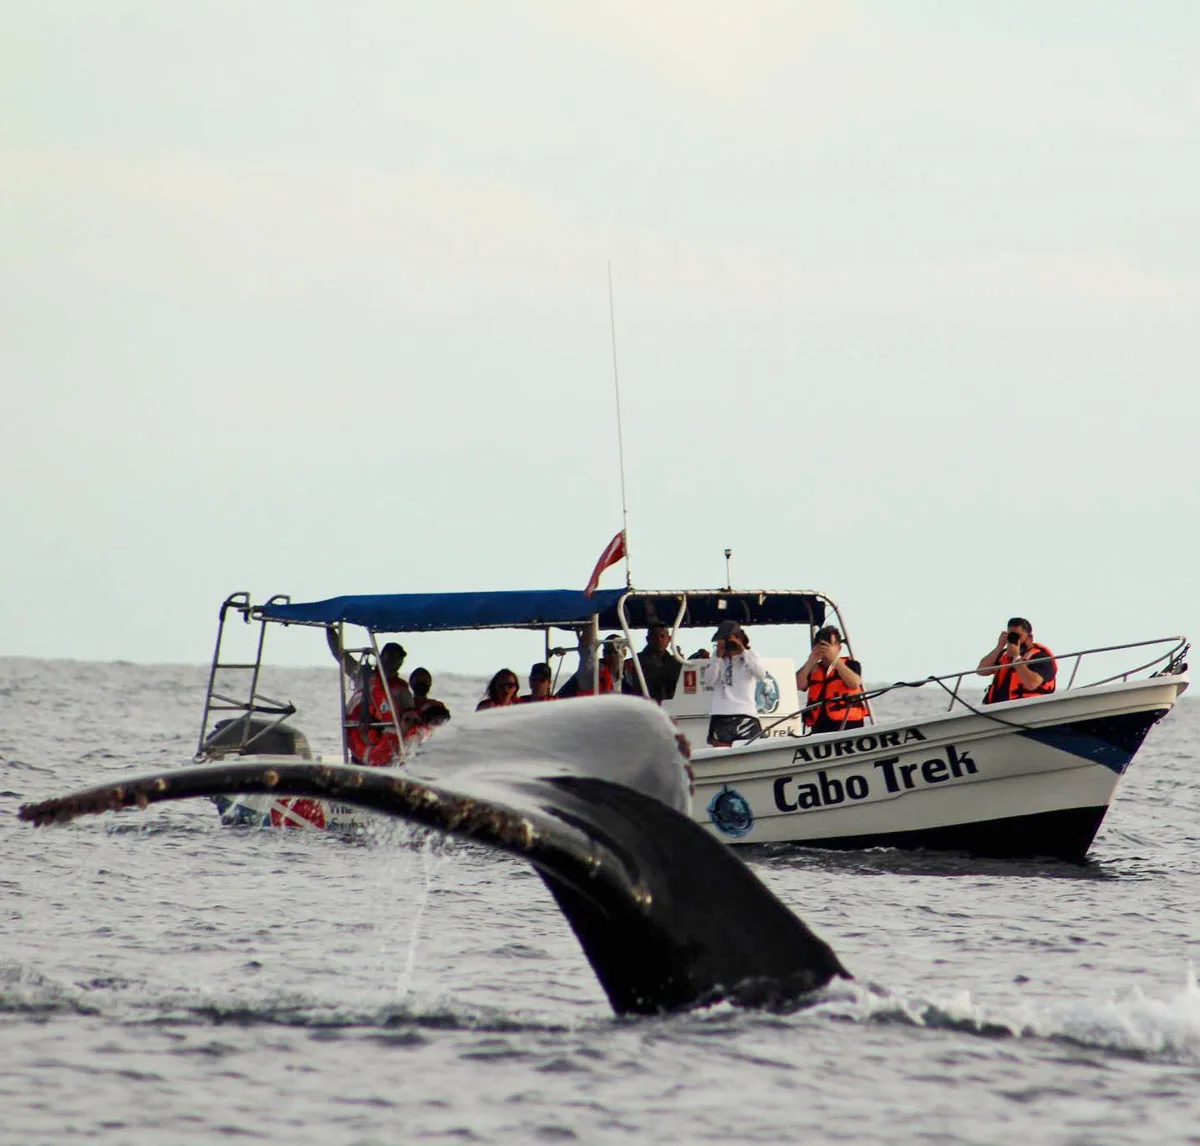 Visitors on a Cabo Trek boat watch a whale go back down under the water